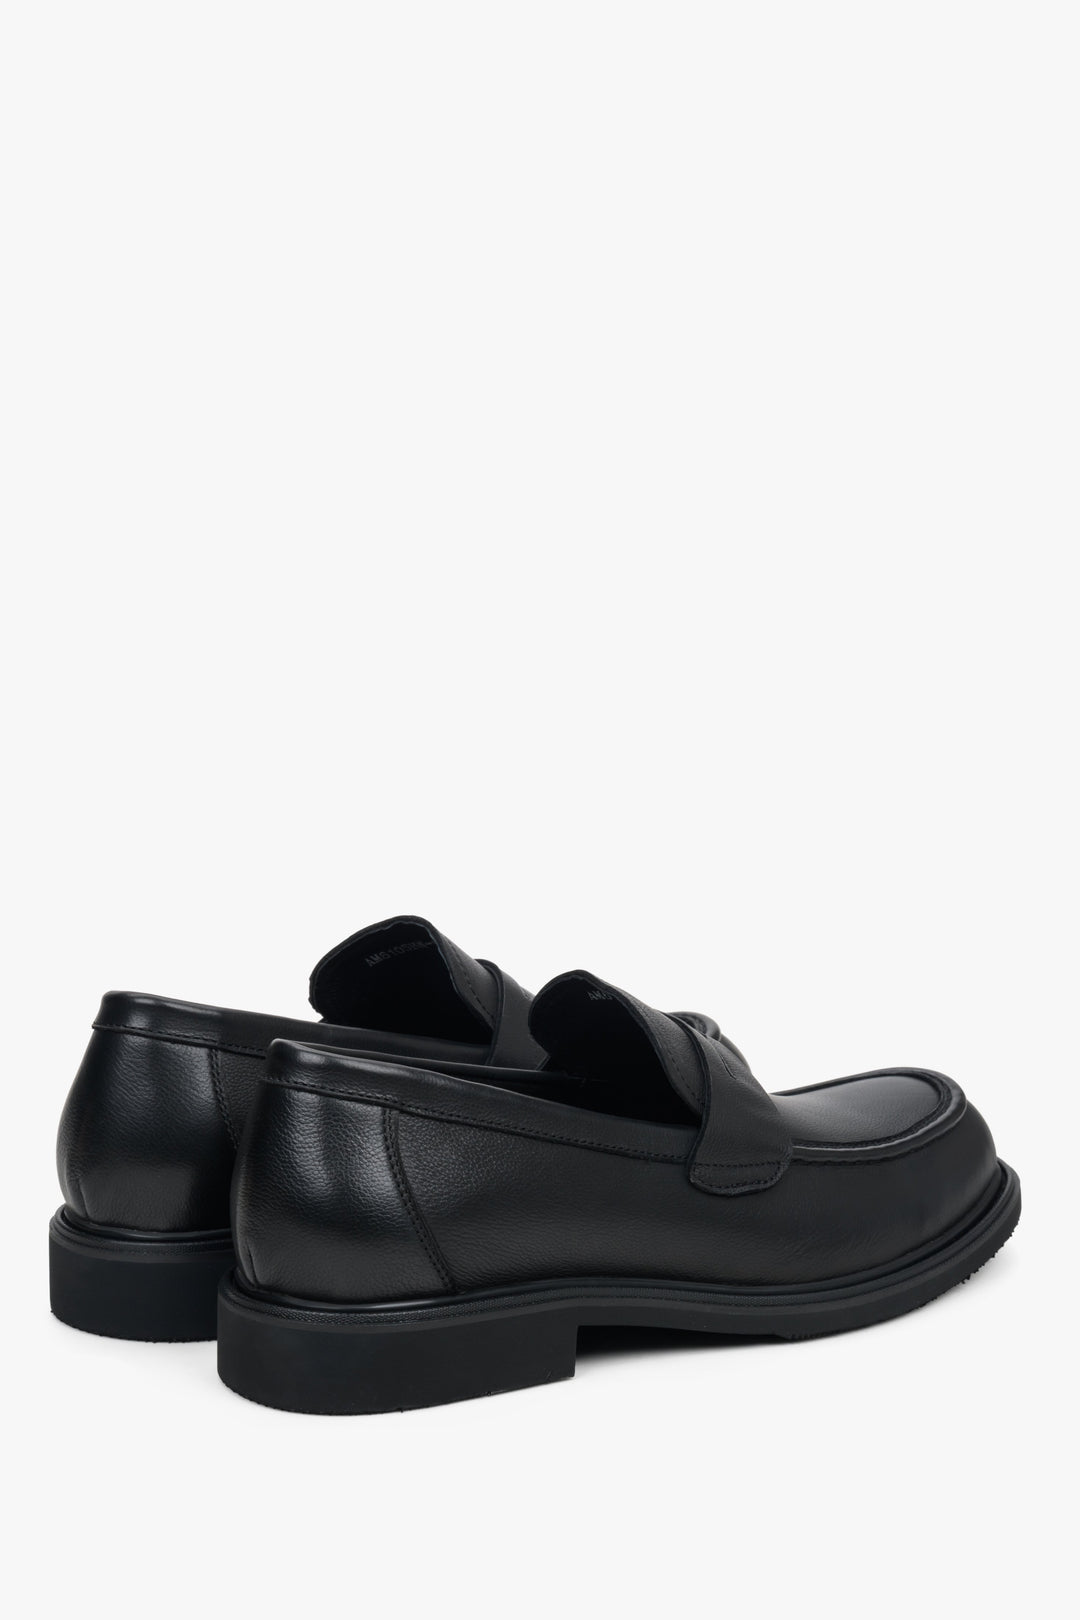 Men's black leather Estro loafers - close-up on the heel and side line of the shoe.